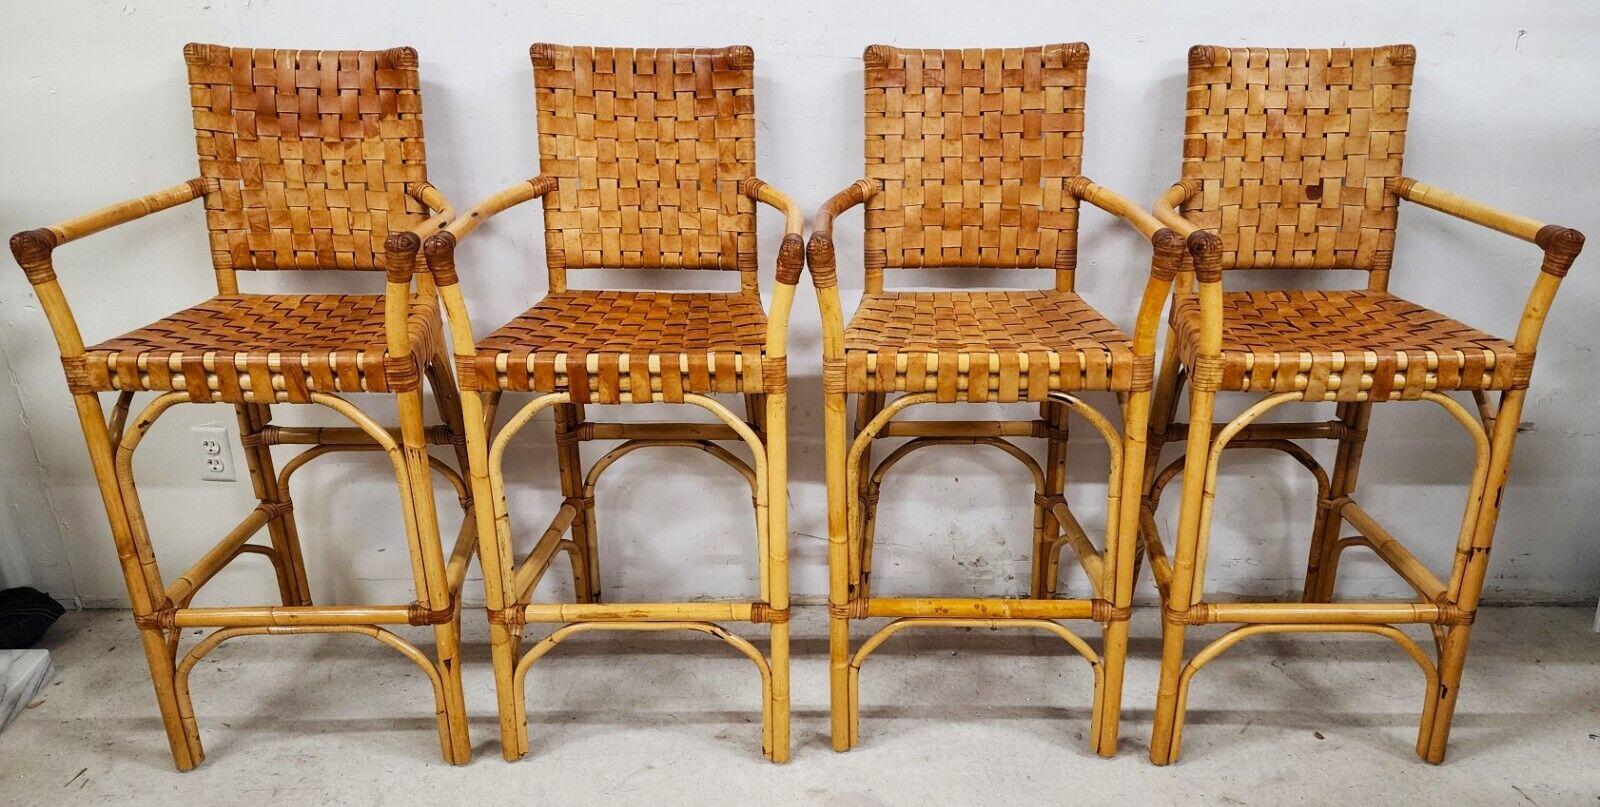 For FULL item description click on CONTINUE READING at the bottom of this page.

Offering One Of Our Recent Palm Beach Estate Fine Furniture Acquisitions Of A
Set of 4 Vintage Bamboo Rattan Leather Rawhide Barstools
 
Approximate Measurements